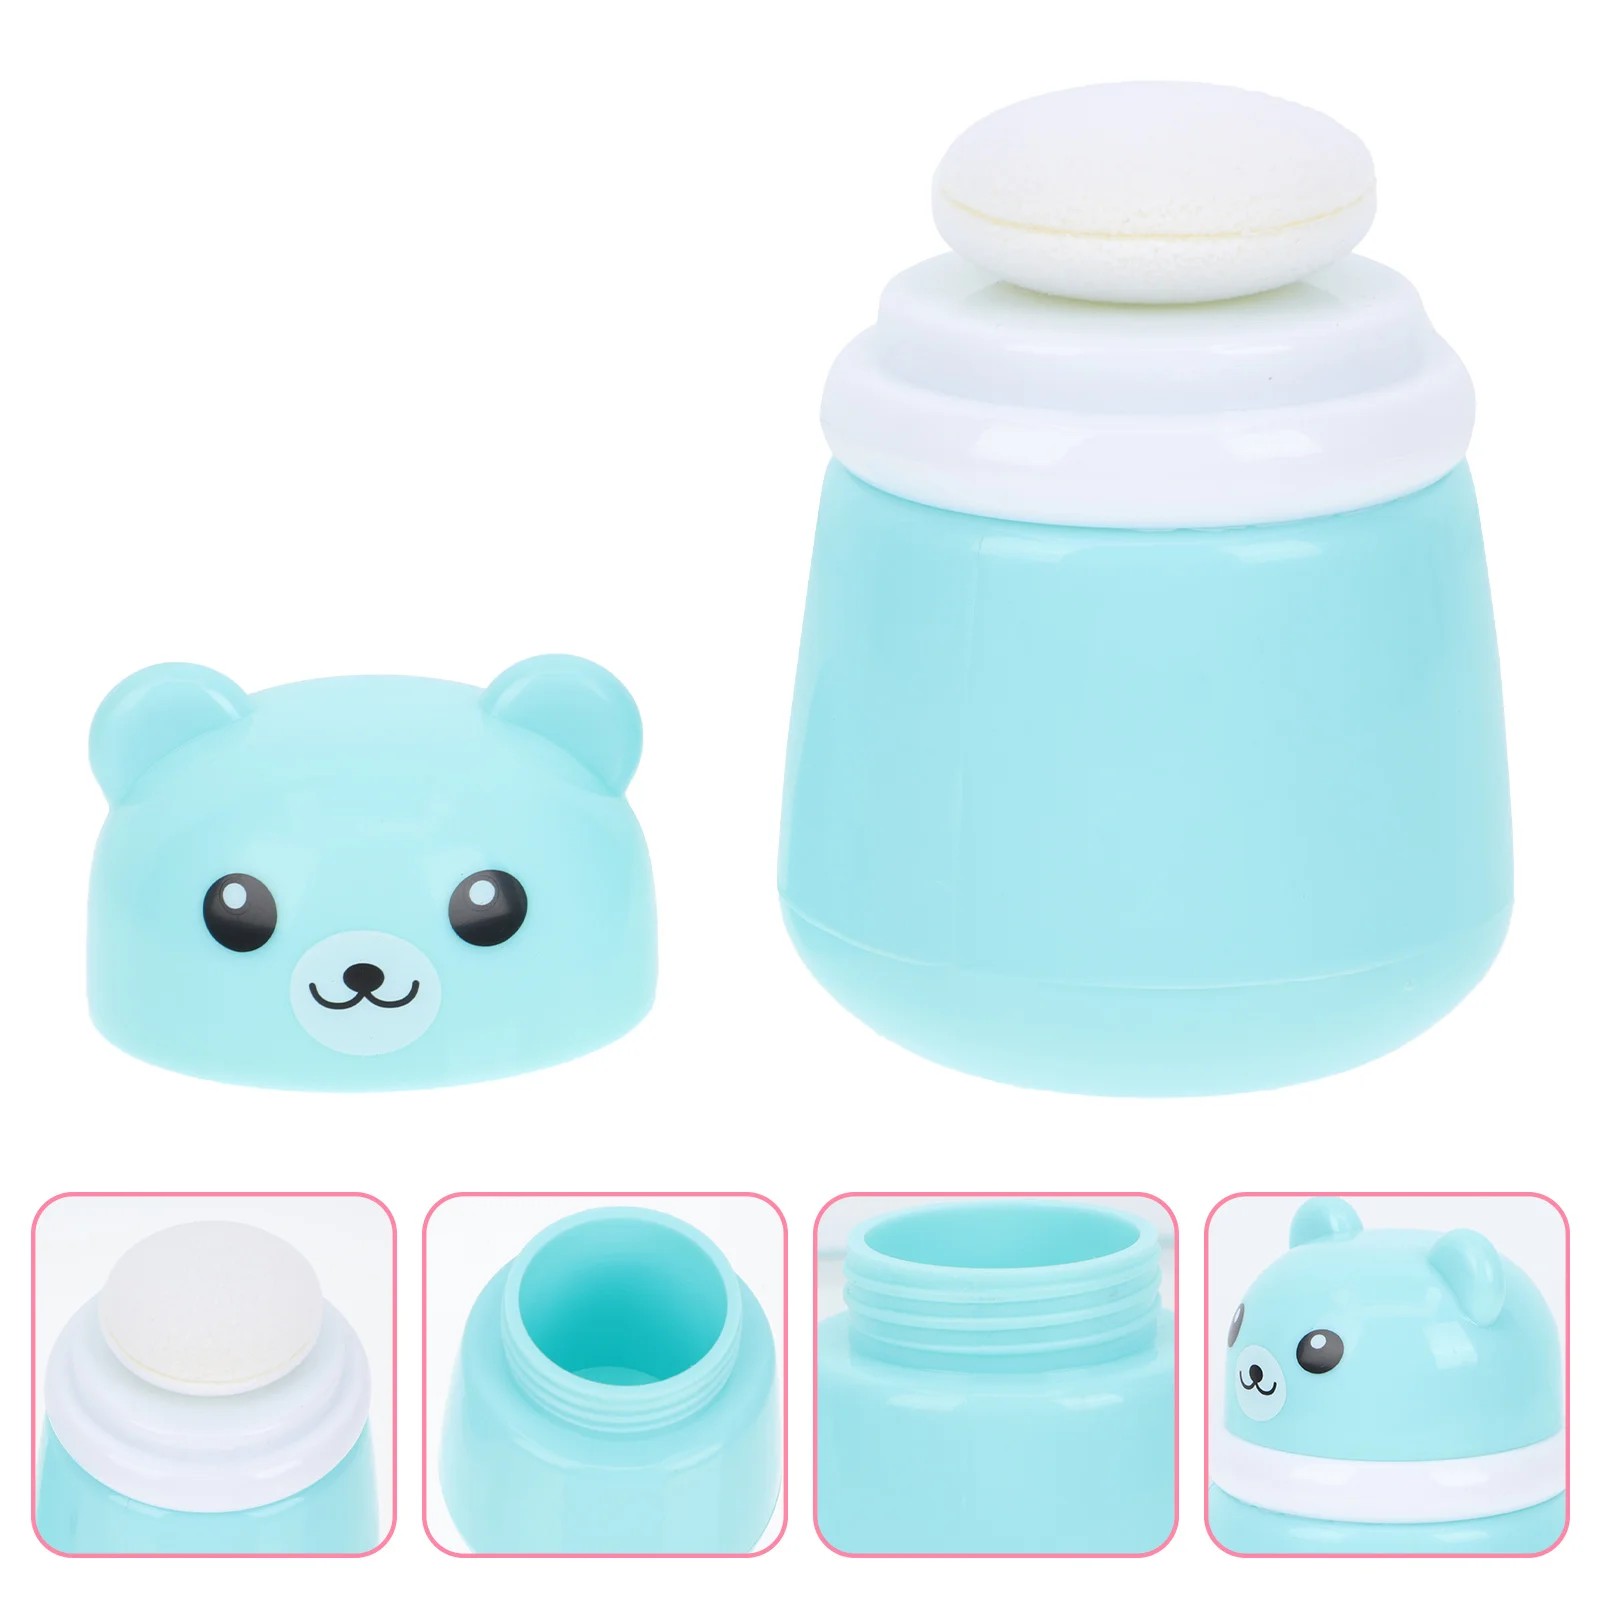 

Puff Box Container Body Baby Case Bottle Loose Talcum Empty Infant Applicator Makeup Puffs Dusting Storage Sponge Compact